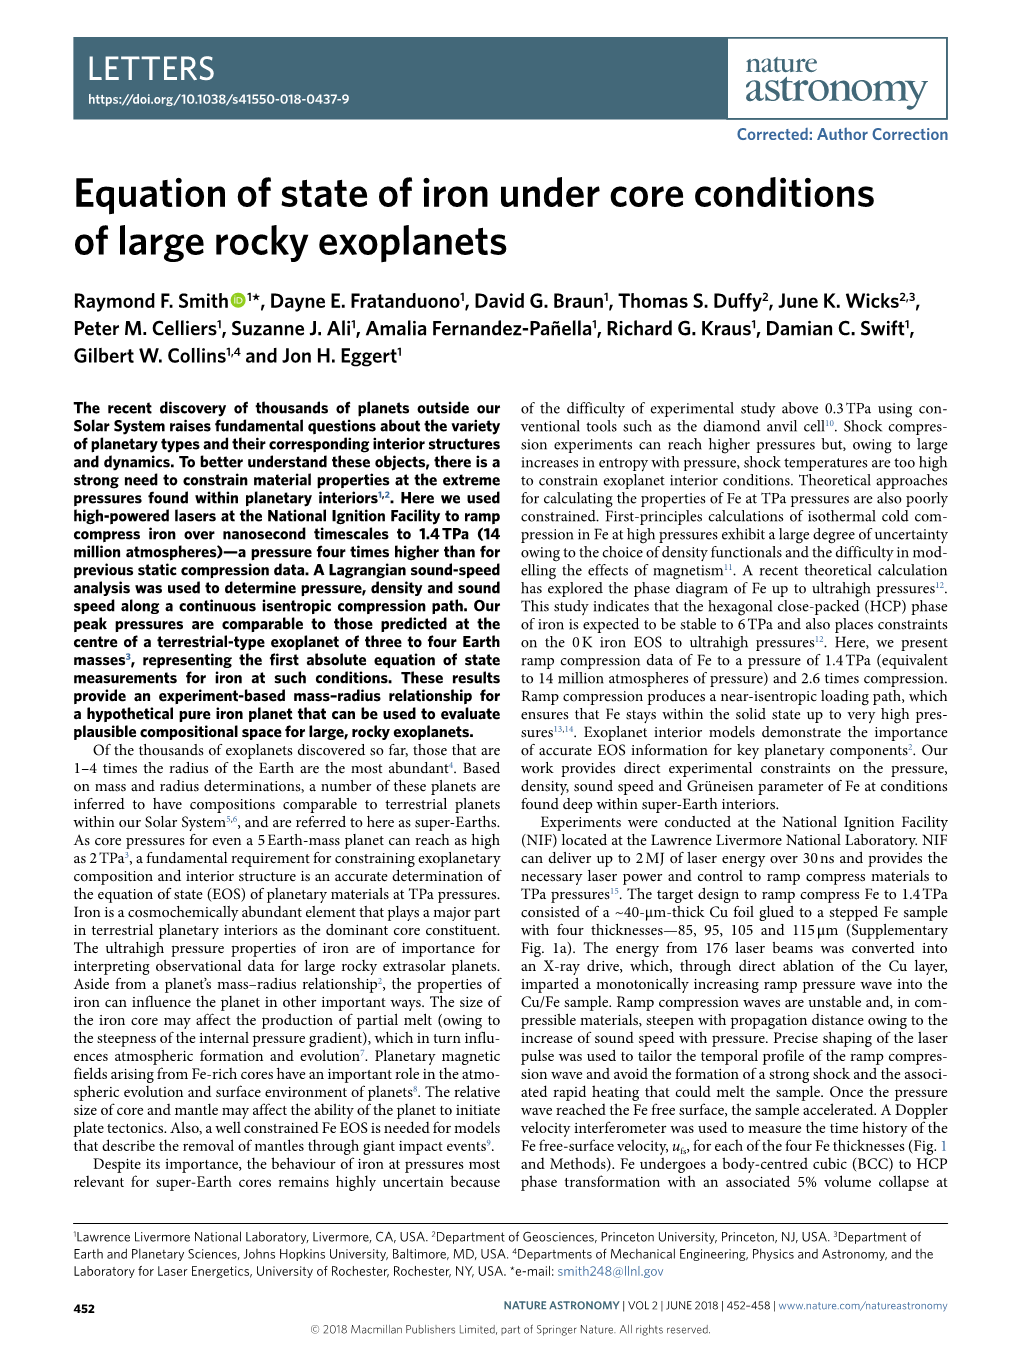 Equation of State of Iron Under Core Conditions of Large Rocky Exoplanets